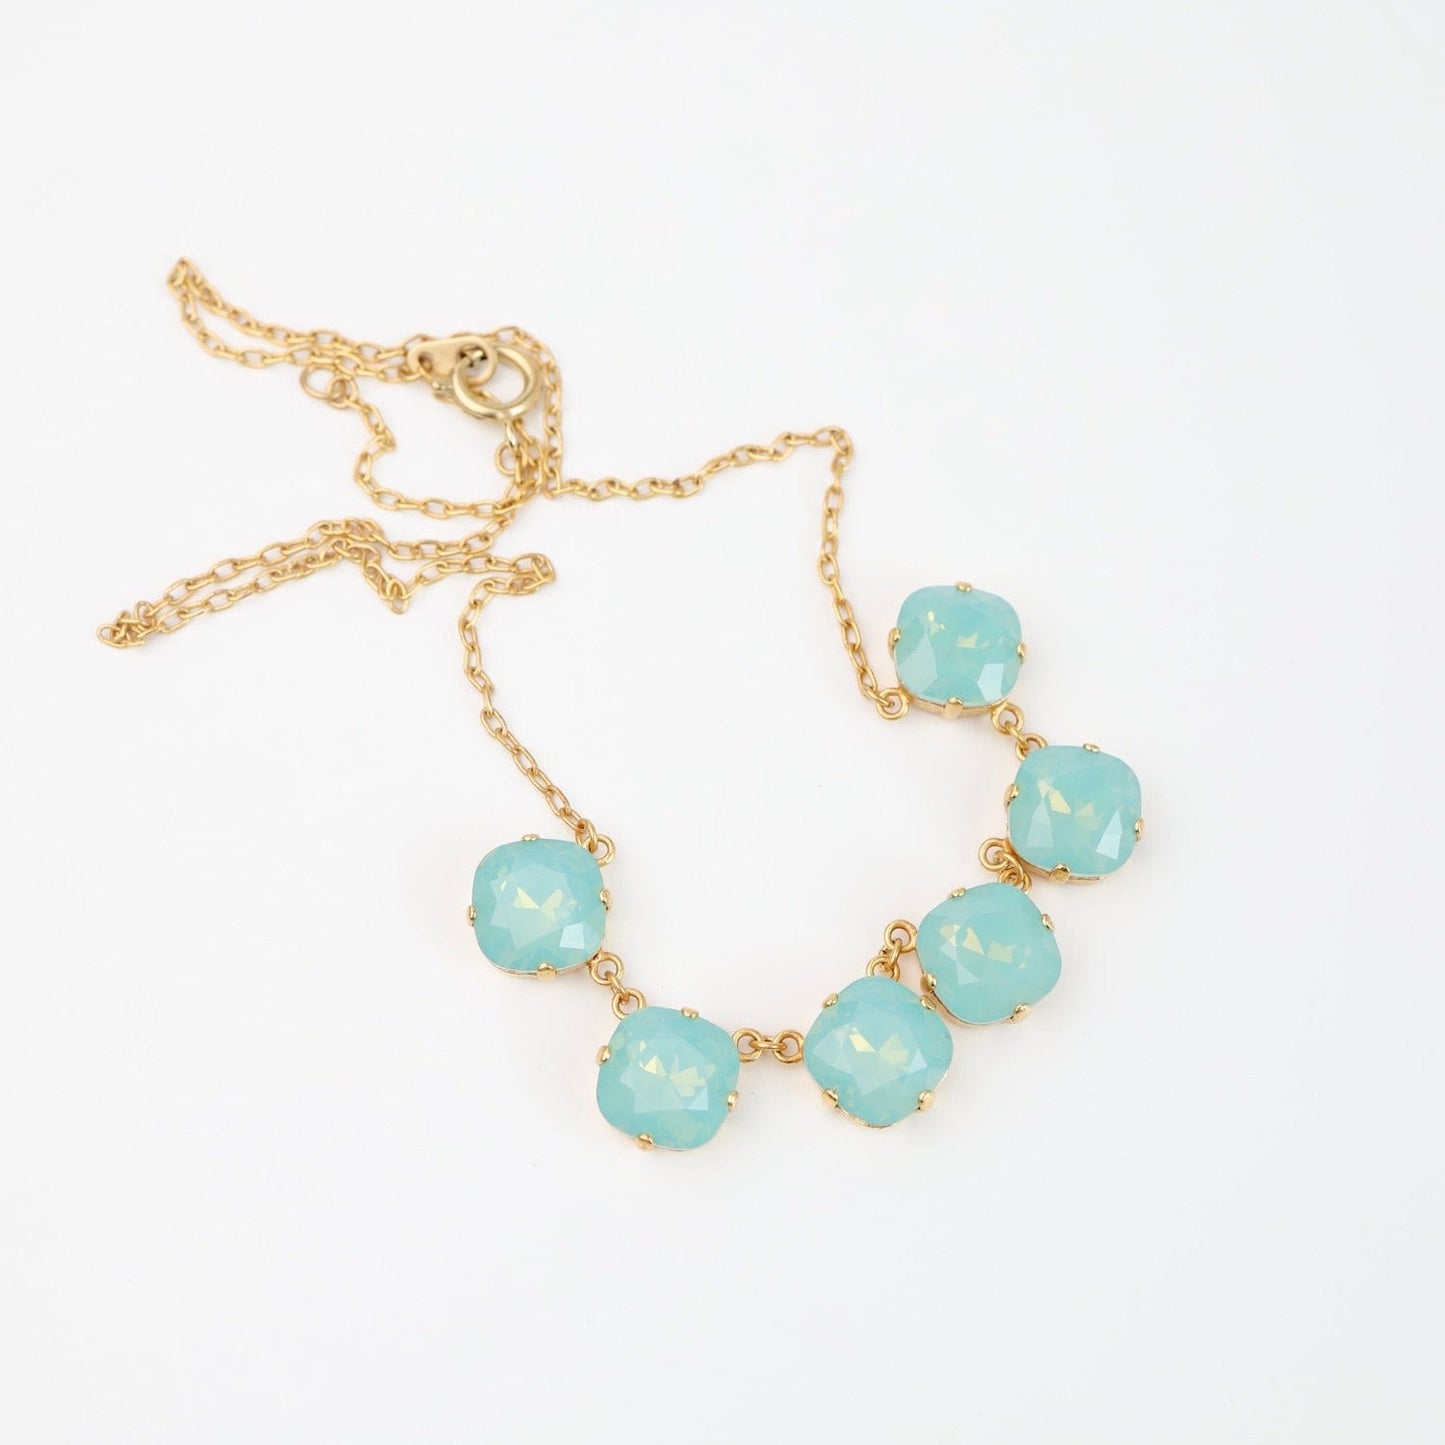 NKL-JM Crystal Line Necklace in Pacific Opal - Gold Plate